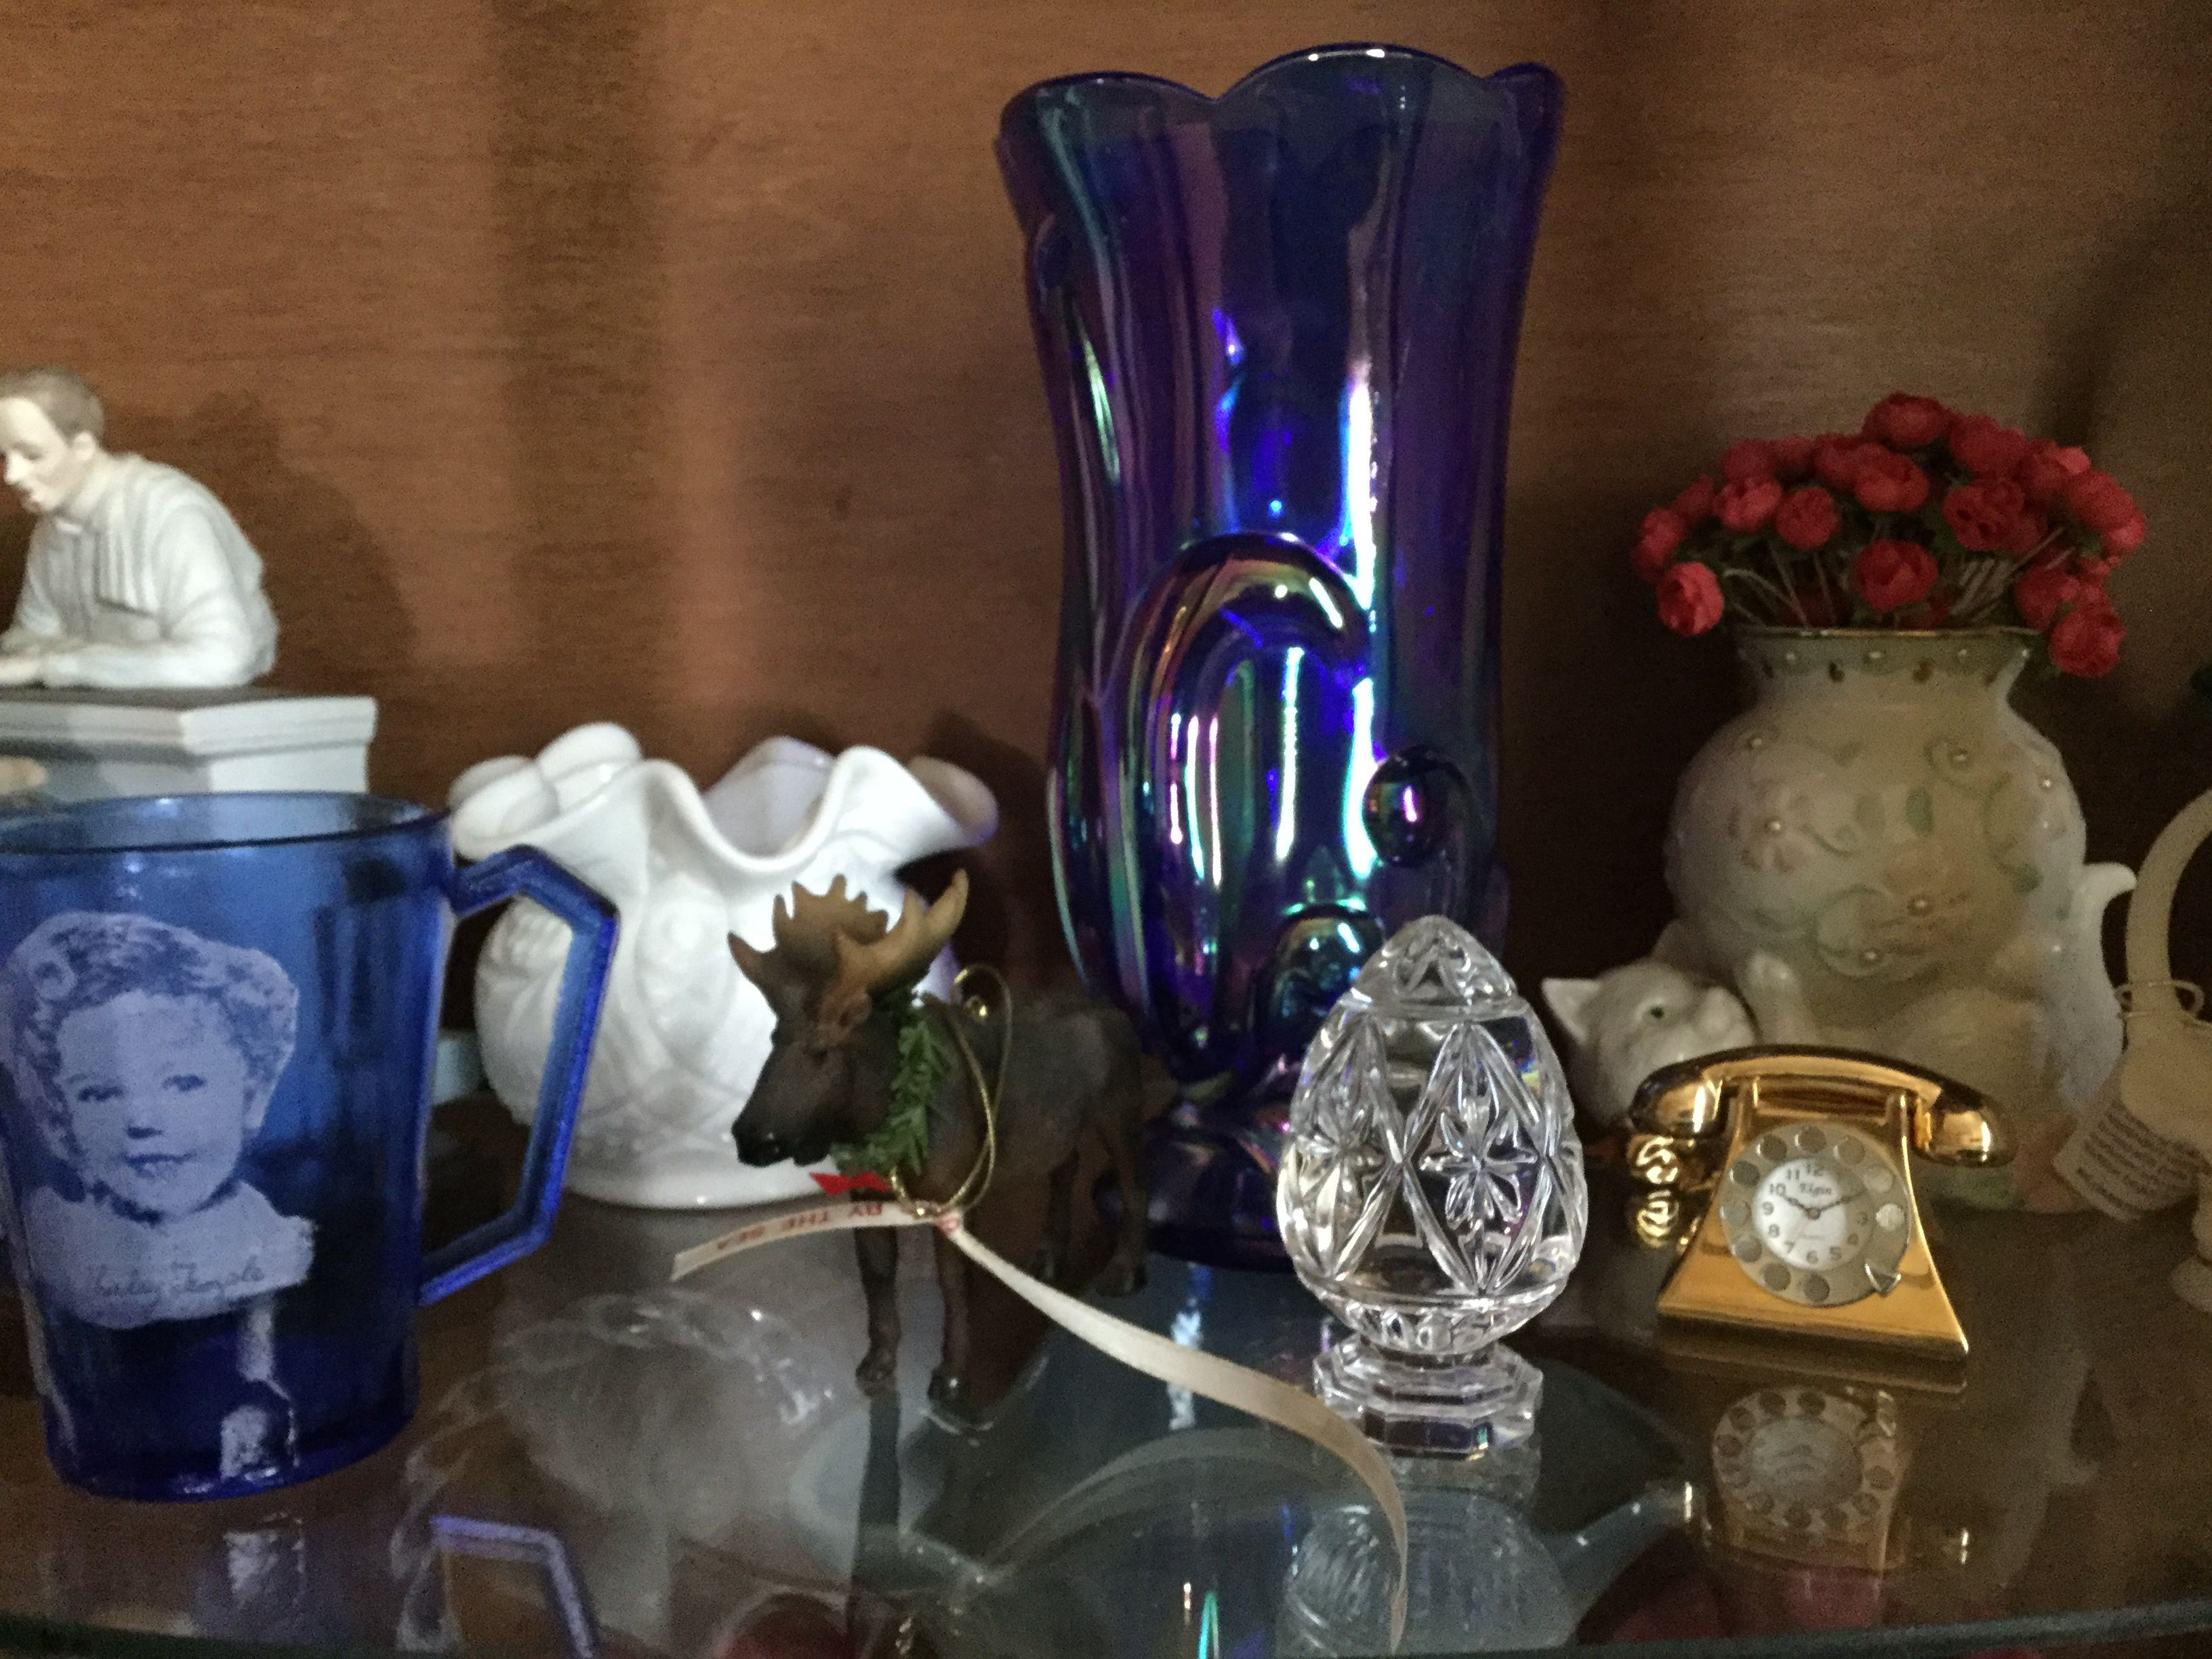 12 attractive Lenox Vases for Sale 2024 free download lenox vases for sale of blue tall vintage fenton vase small fenton vase 1930s shirley in blue tall vintage fenton vase small fenton vase 1930s shirley temple cobalt blue cup lenox cat in bac